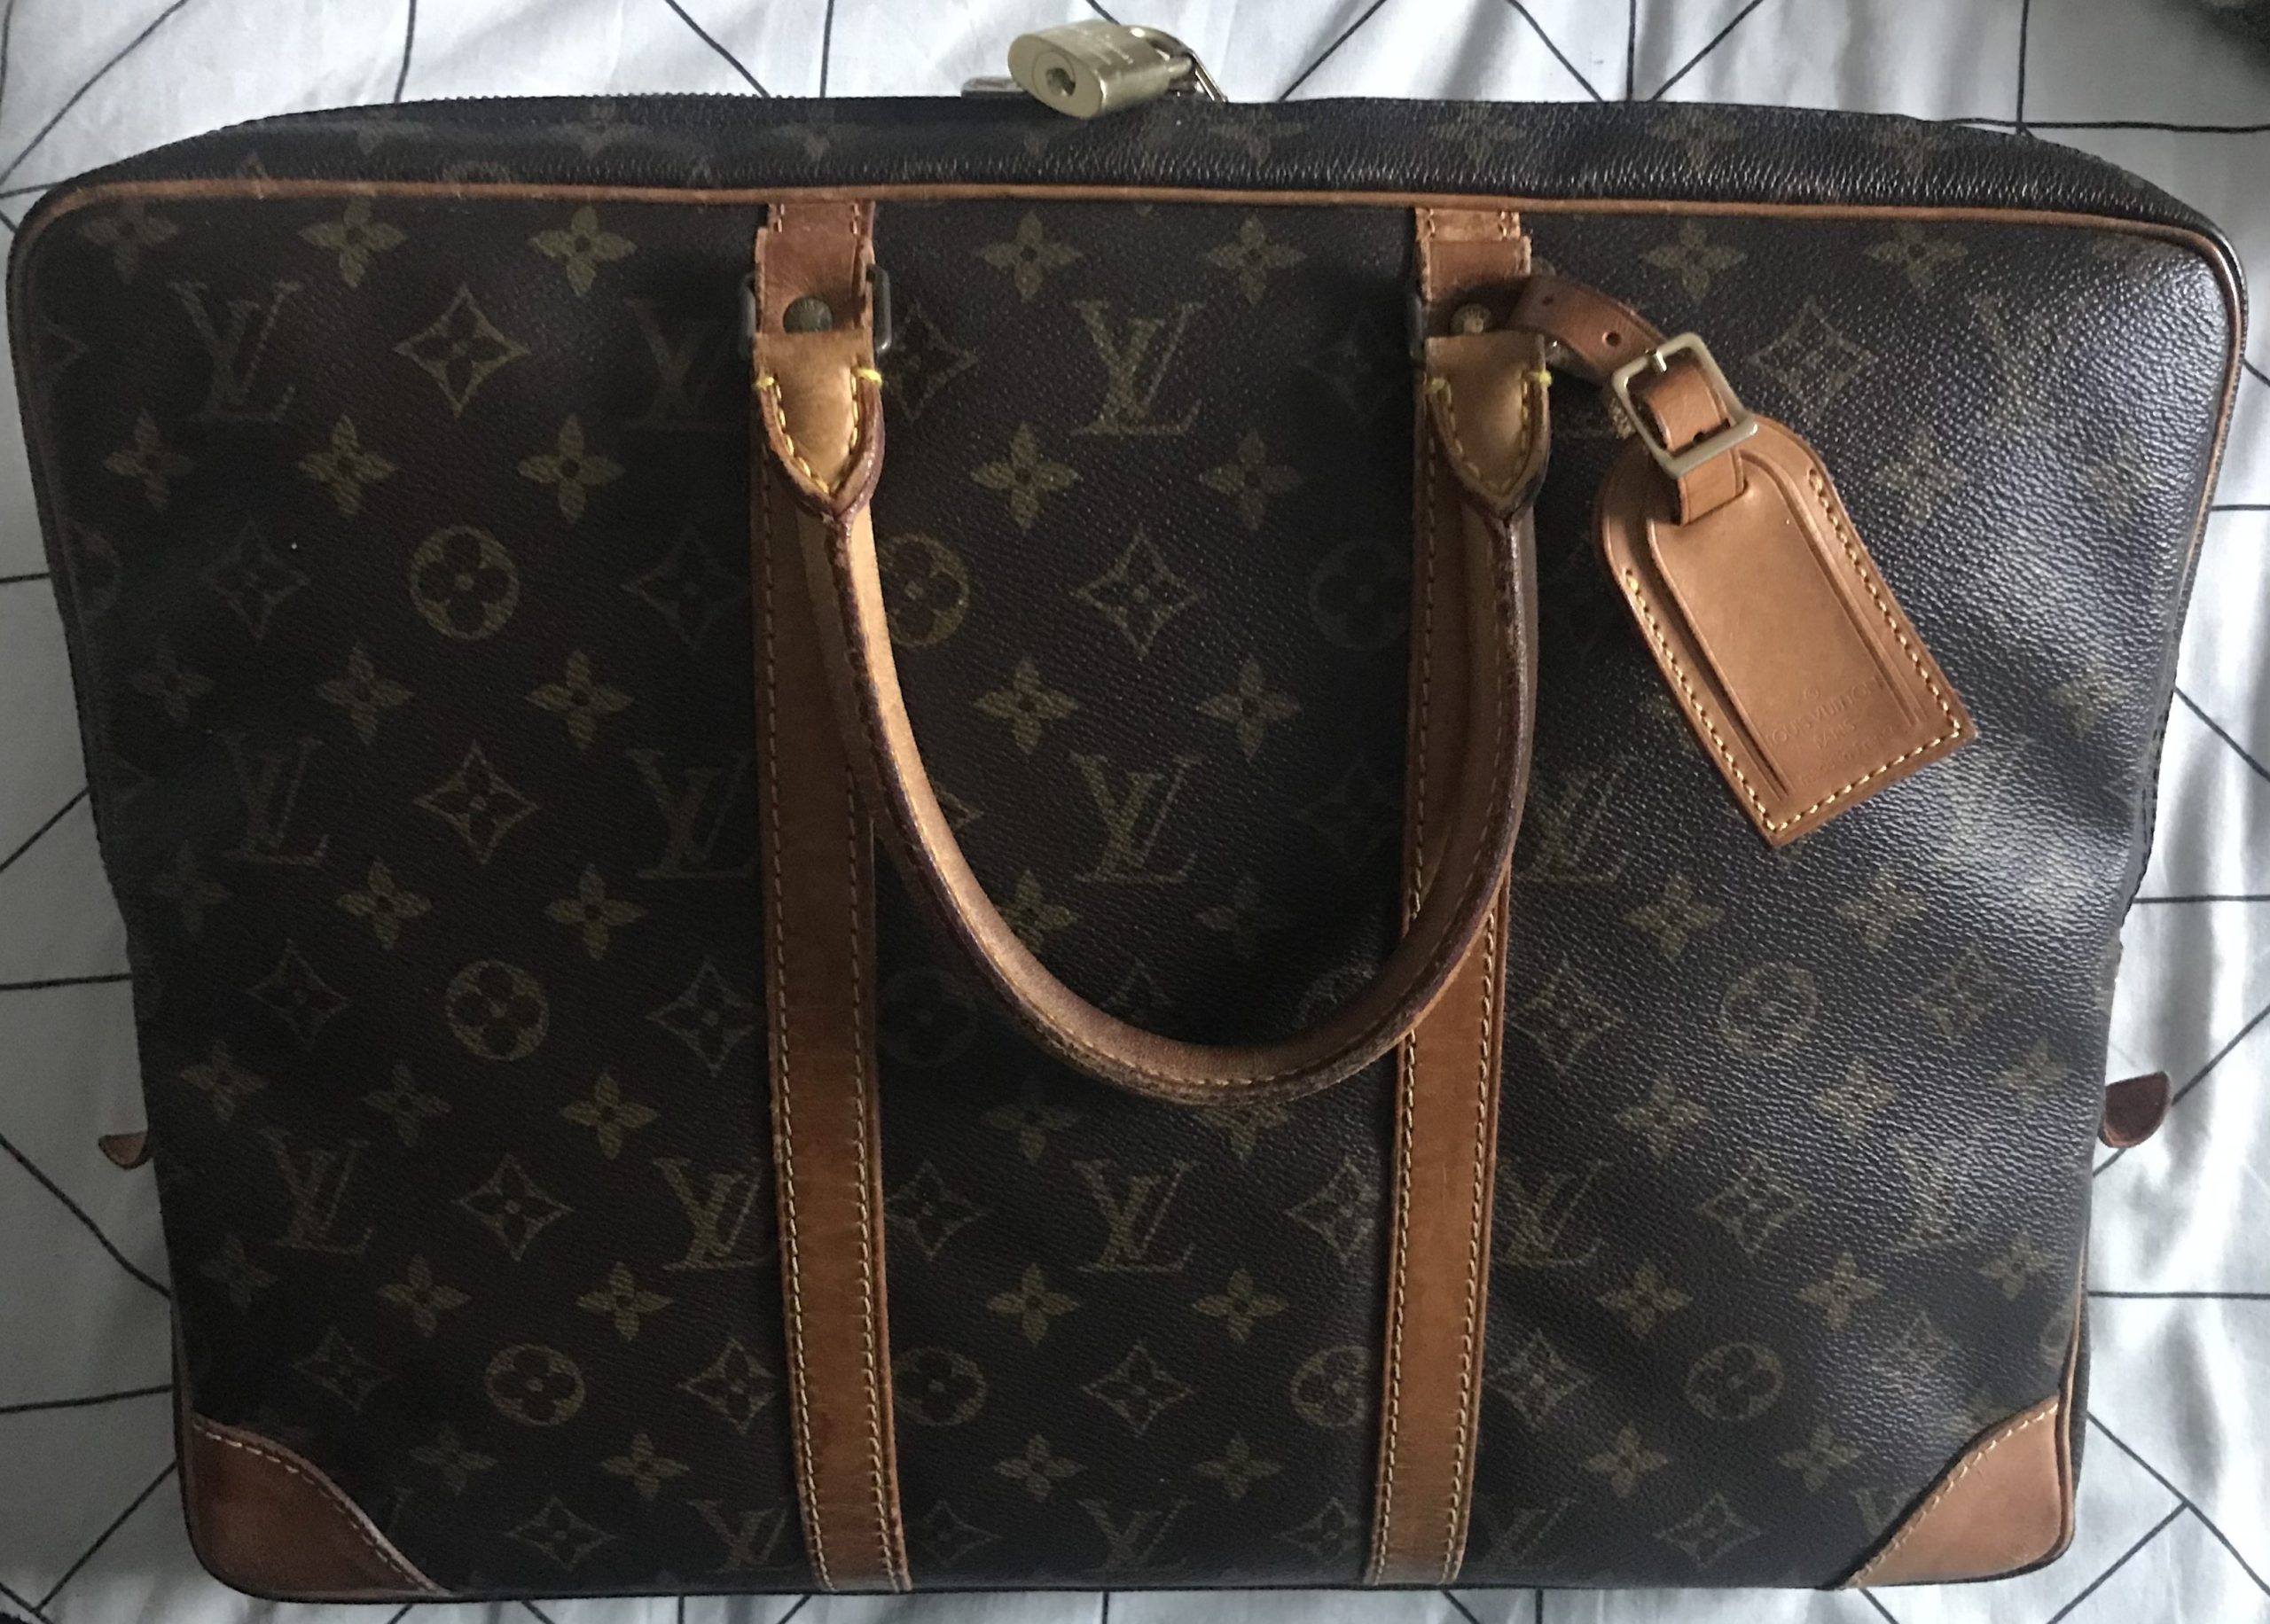 Handbag Facelift  How I Cleaned & Conditioned the Vachetta on My Vintage Louis  Vuitton Speedy 30 